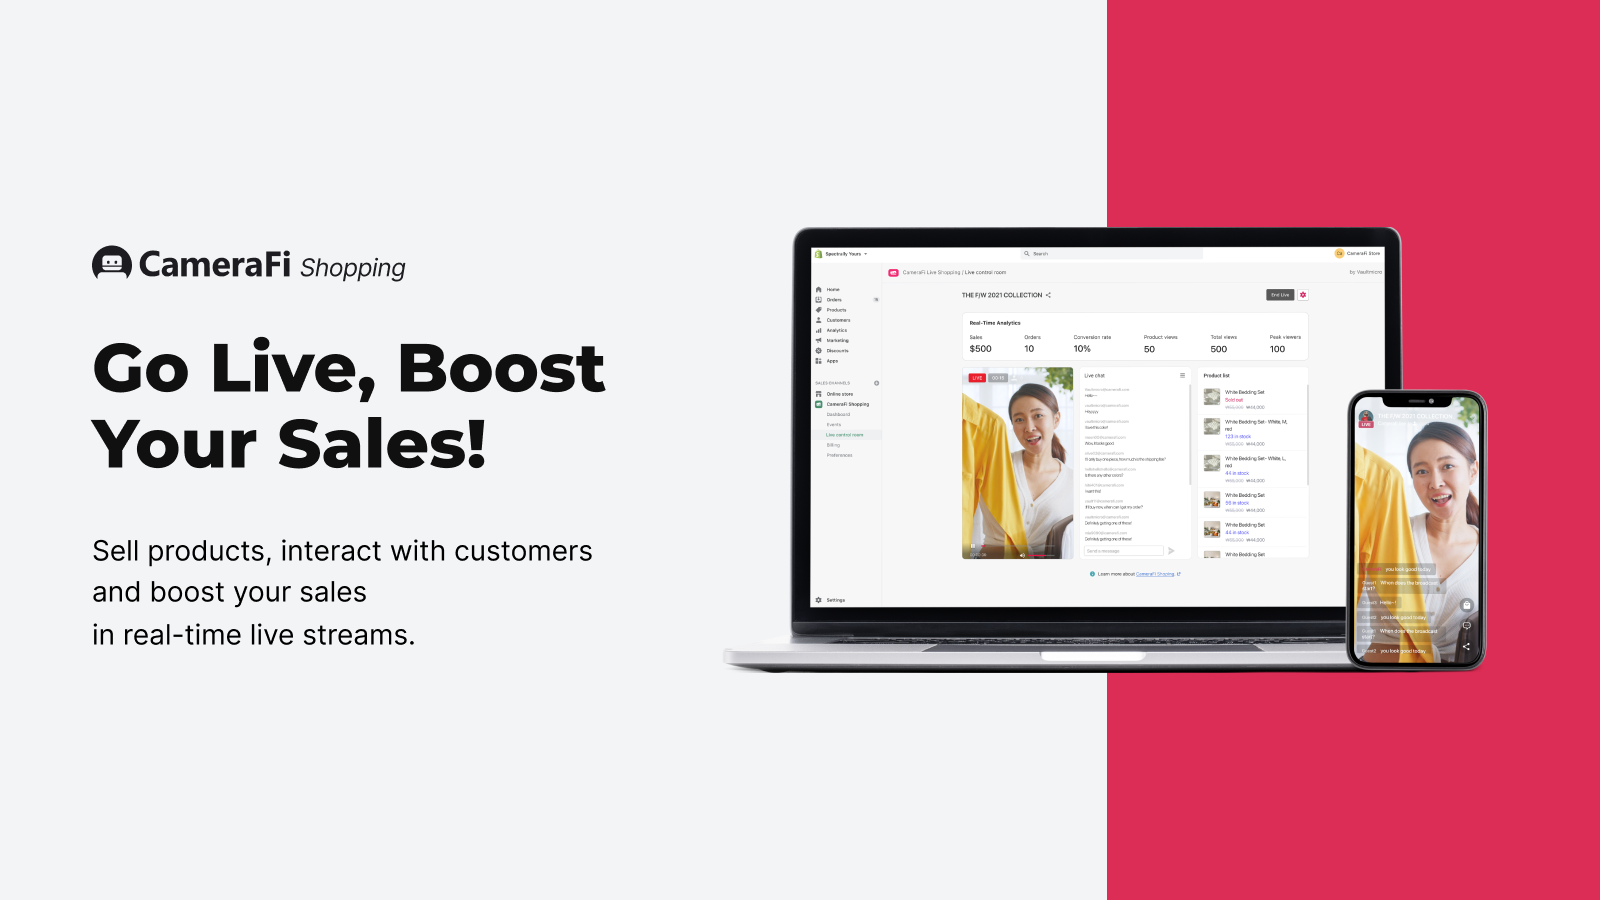 Go Live, Boost Your Sales, CameraFi Shopping